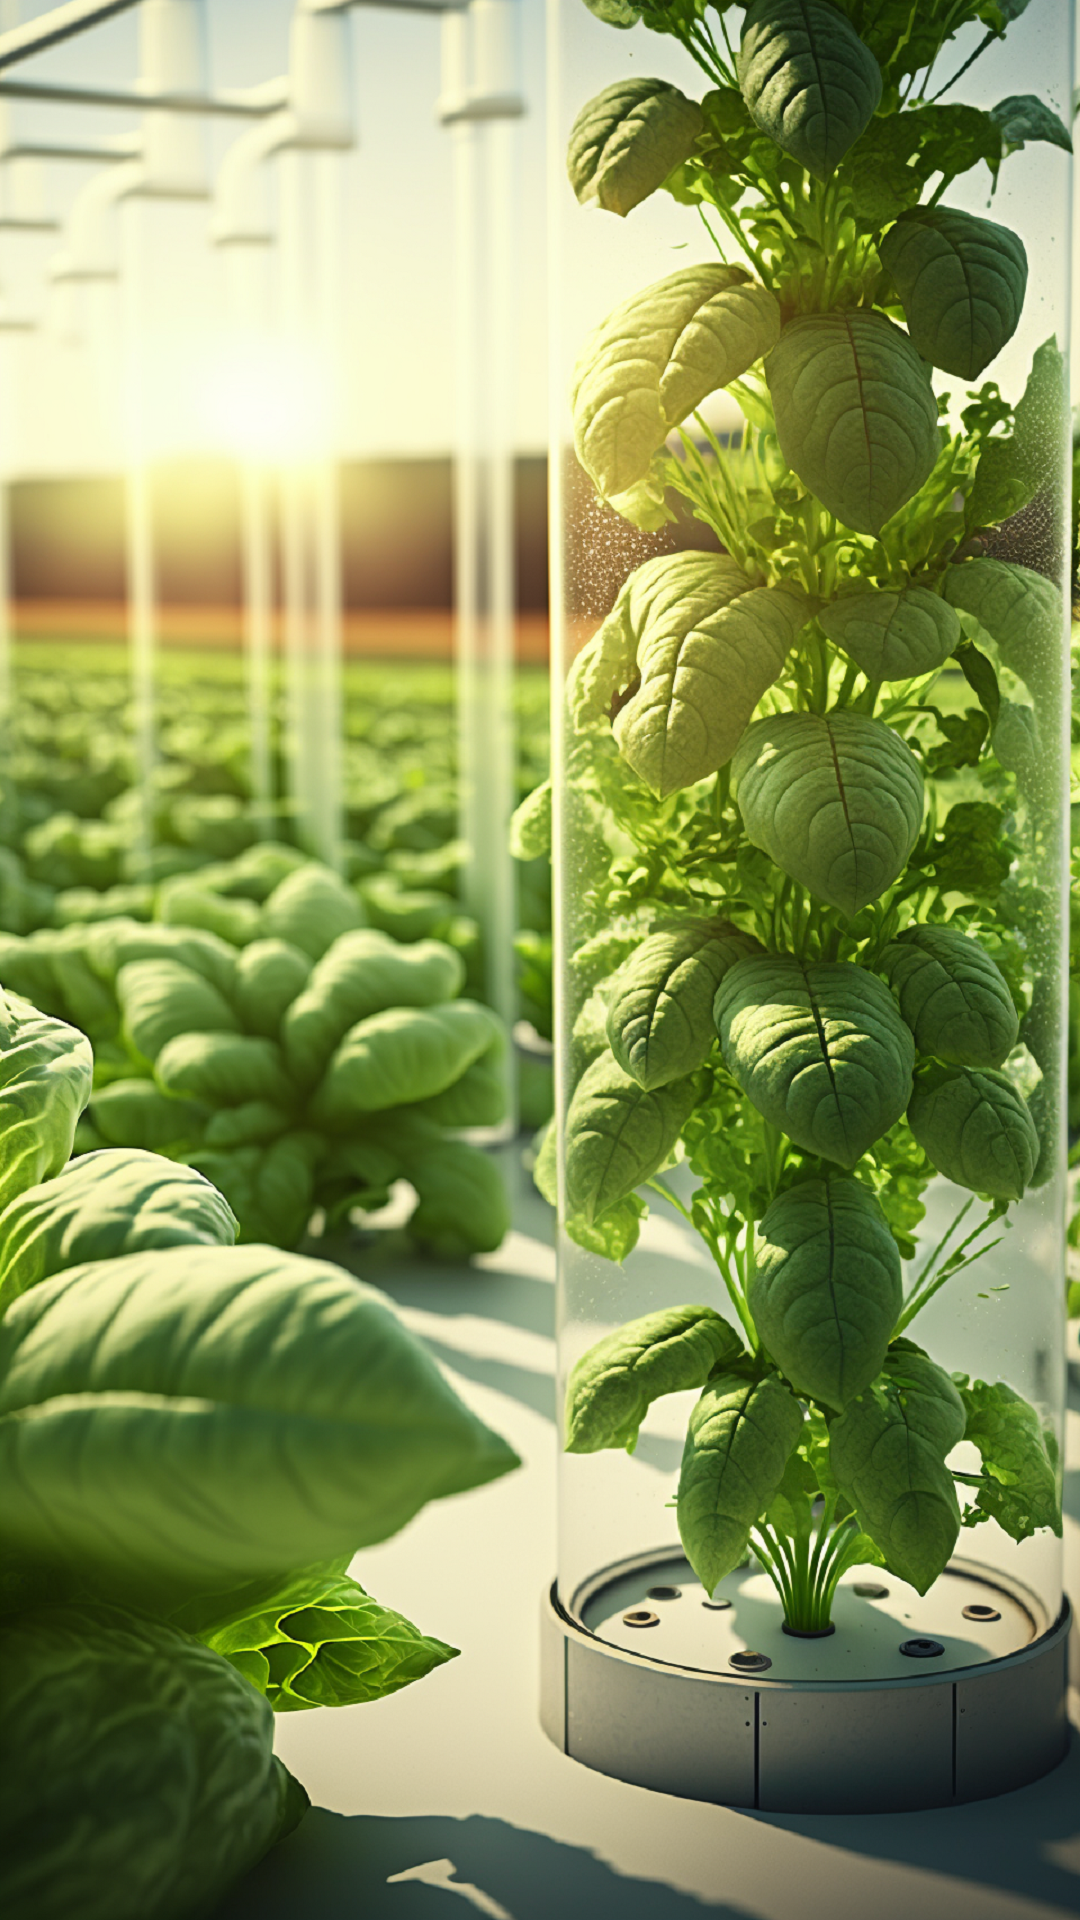 Lettuce and spinach growing in a vertical hydroponic tube placed in a hydroponic farm with a lot of other such tubes in the background